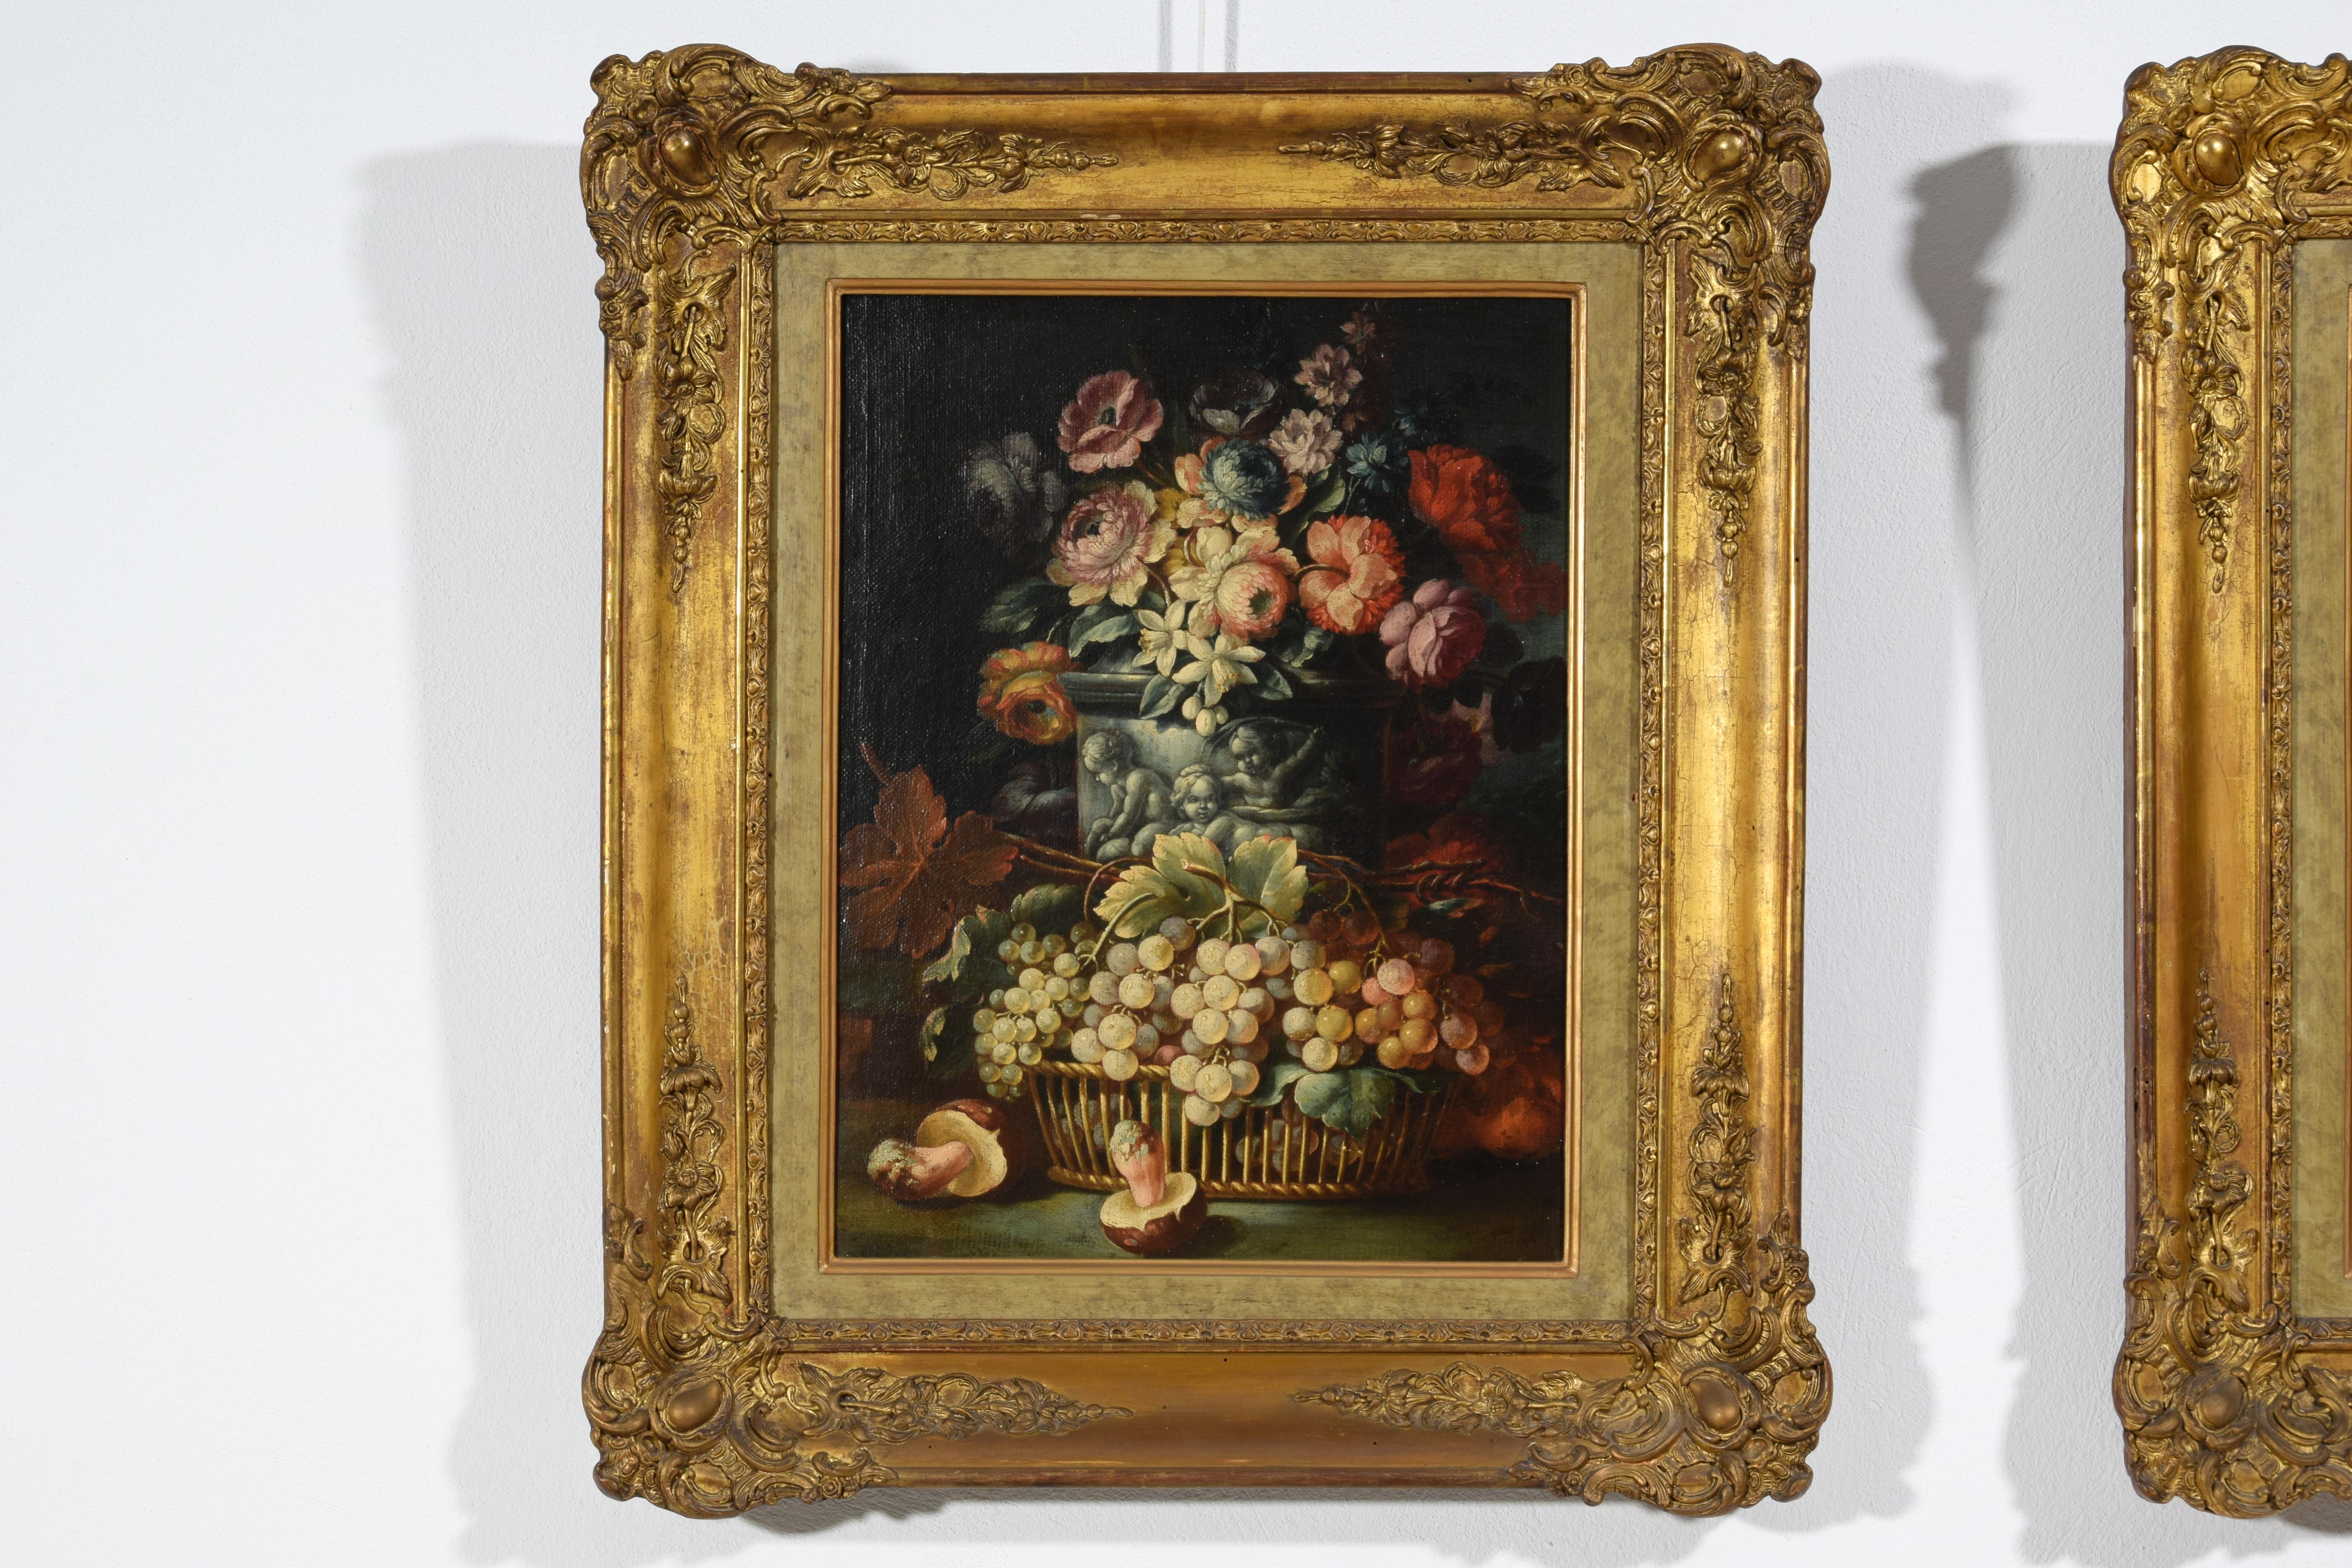 18th Century and Earlier 18th Century, Two Still Lifes with Flowers and Fruits by Italian Paintings For Sale